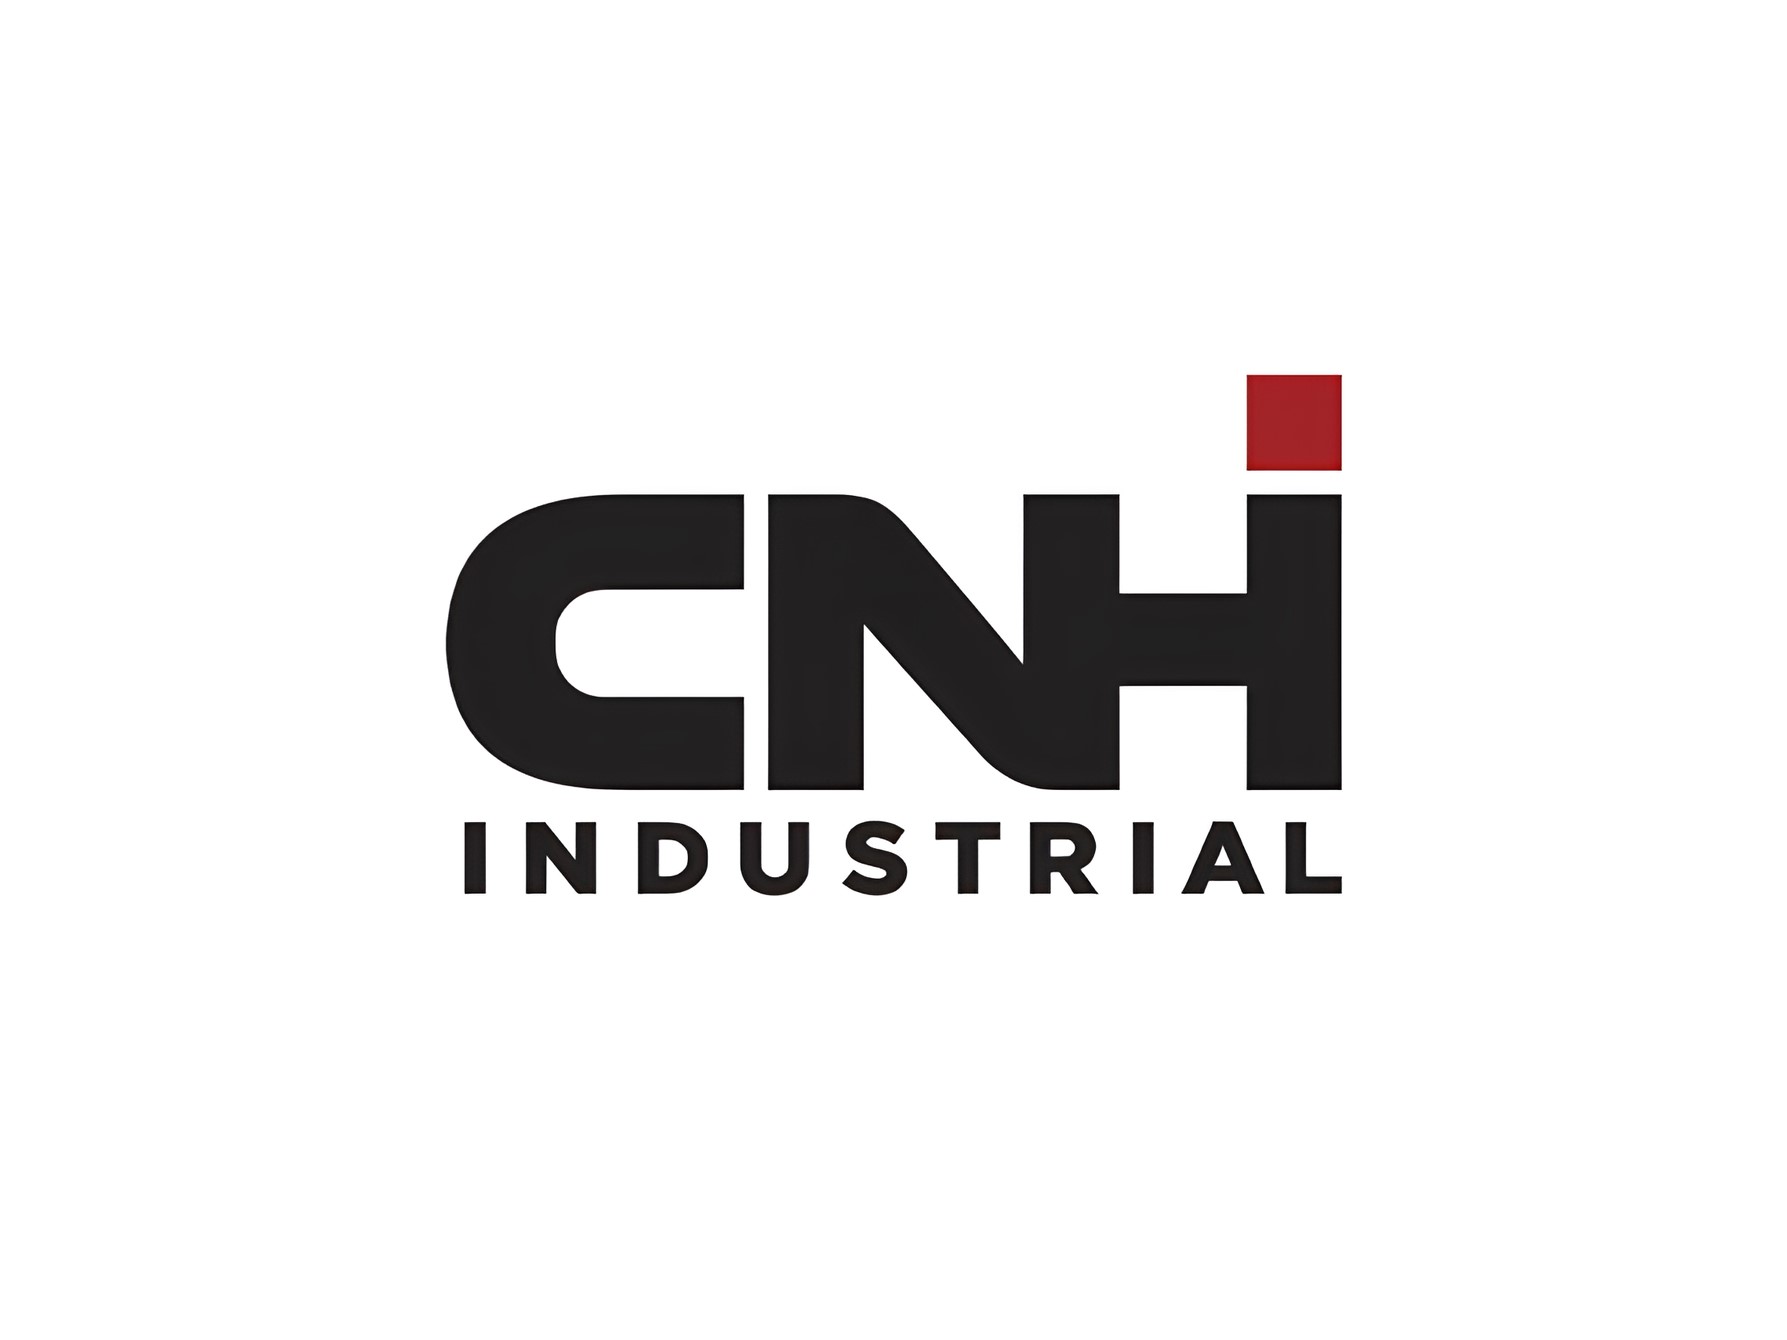 New Shirt CNH Industrial Agricultural machinery Logo T-Shirt | eBay